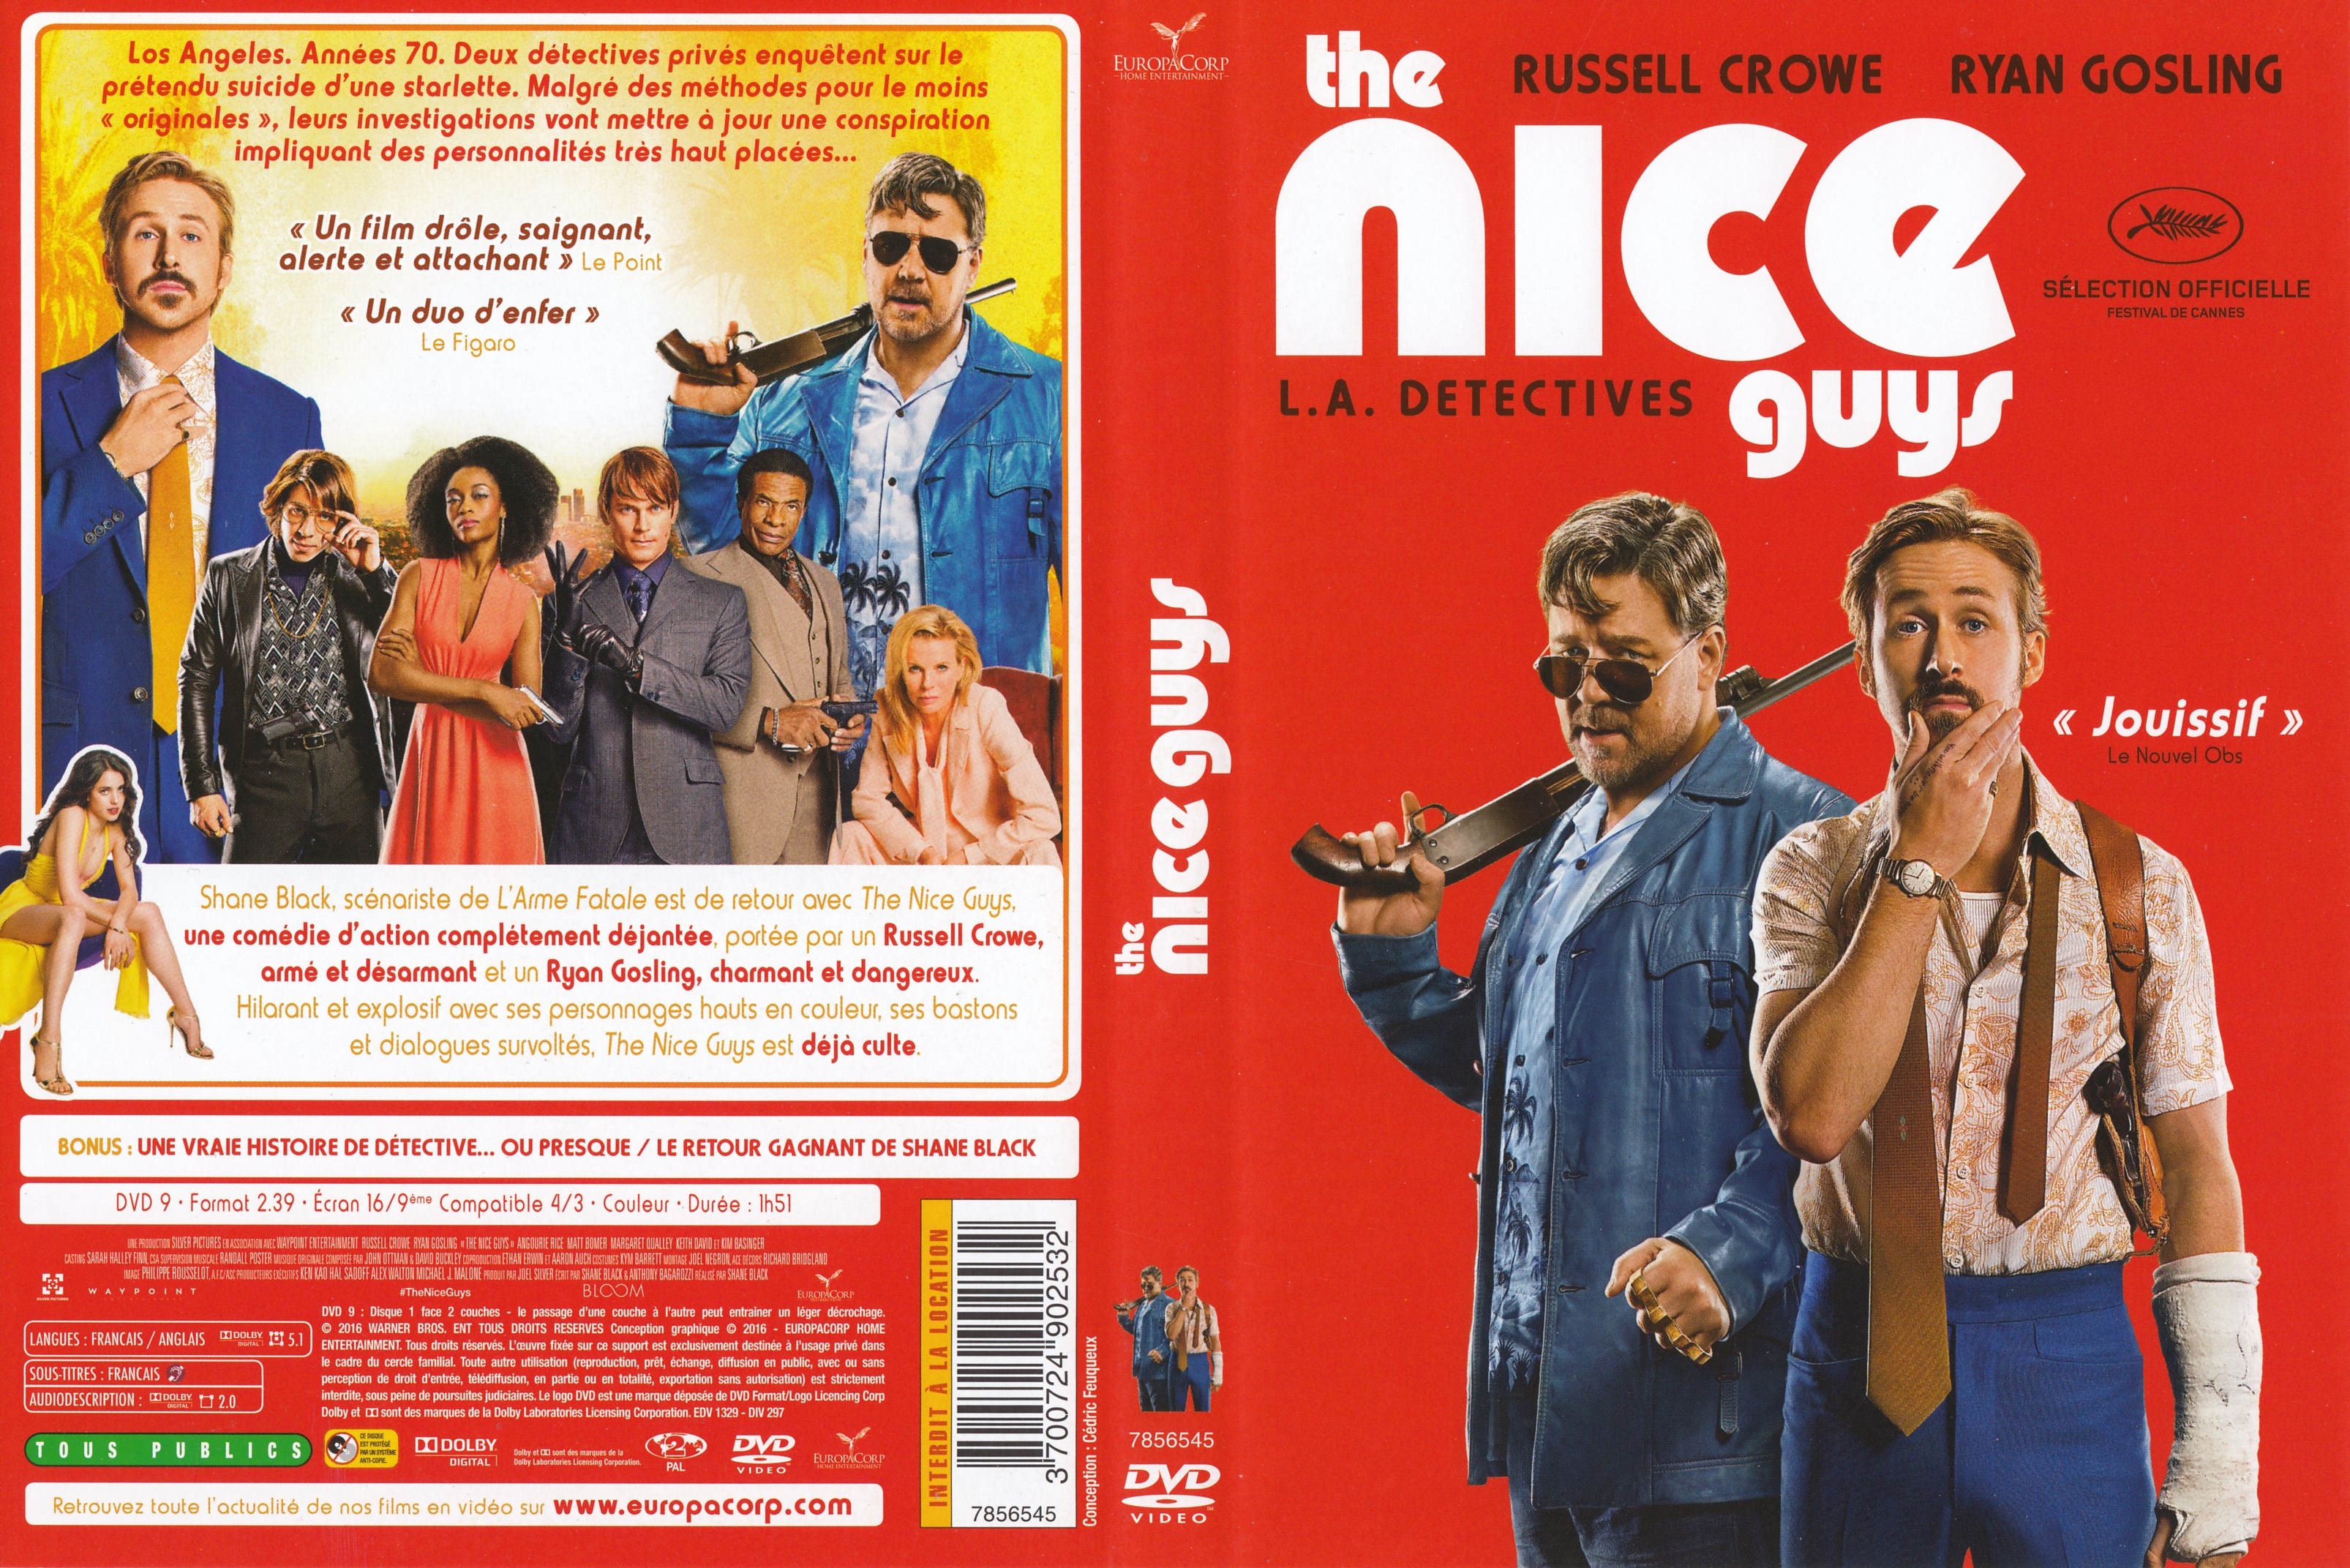 Jaquette DVD The Nice Guys